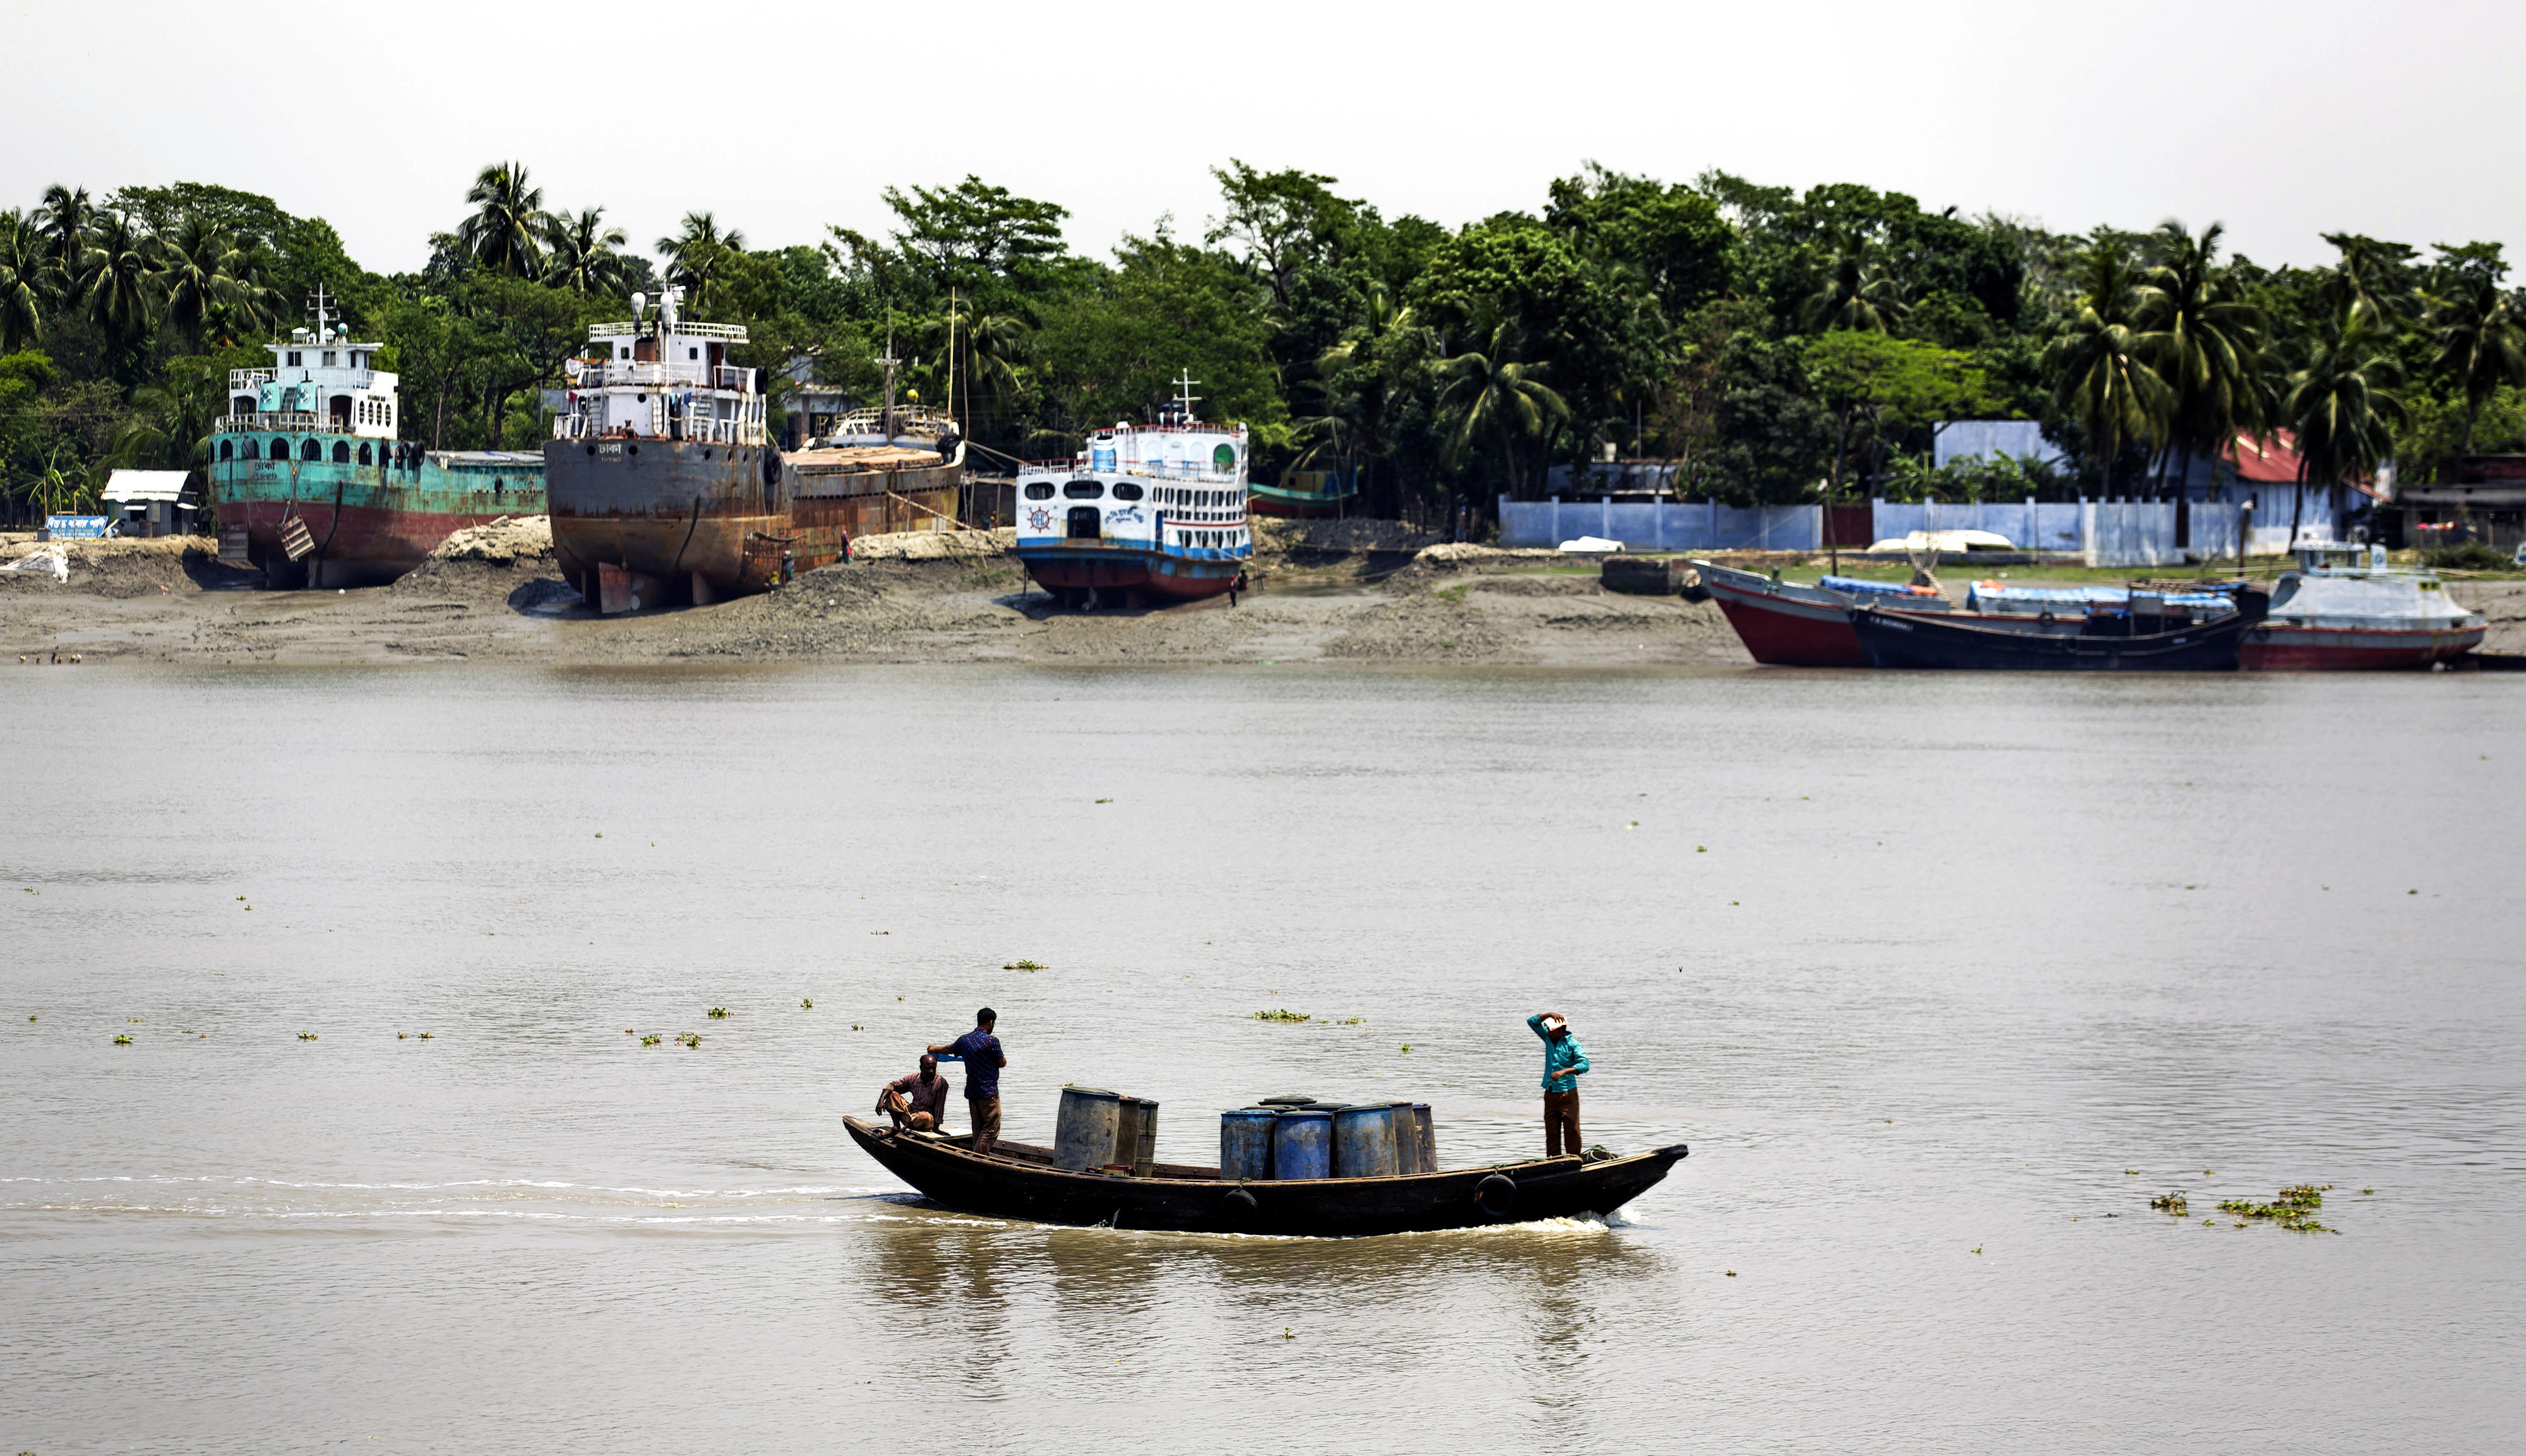 A motorboat driving through the port of Khulna, Bangladesh